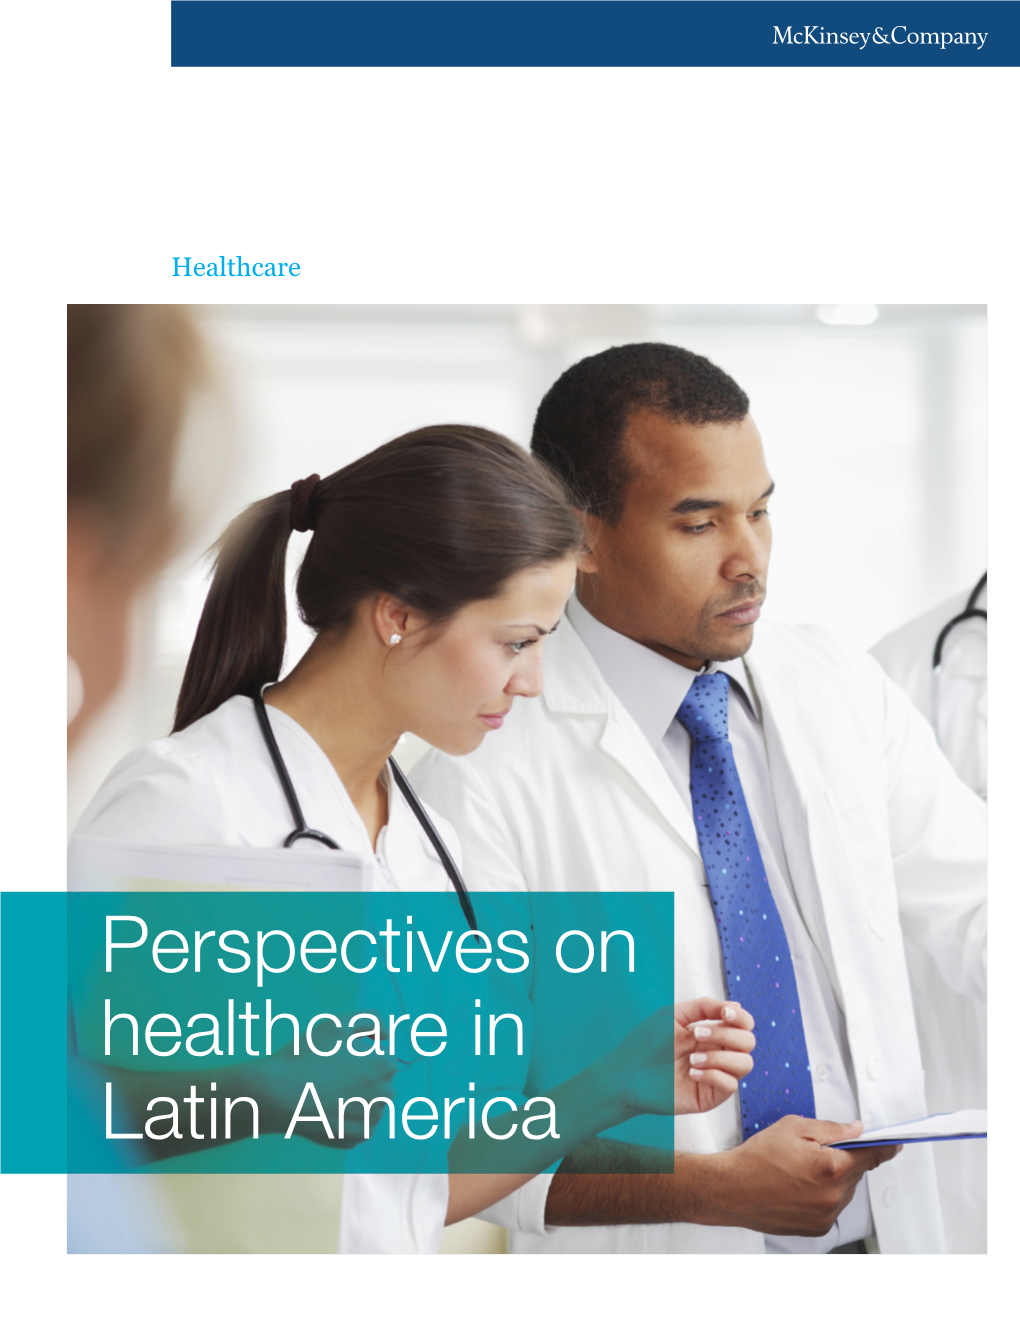 Perspectives on Healthcare in Latin America 2 Contents